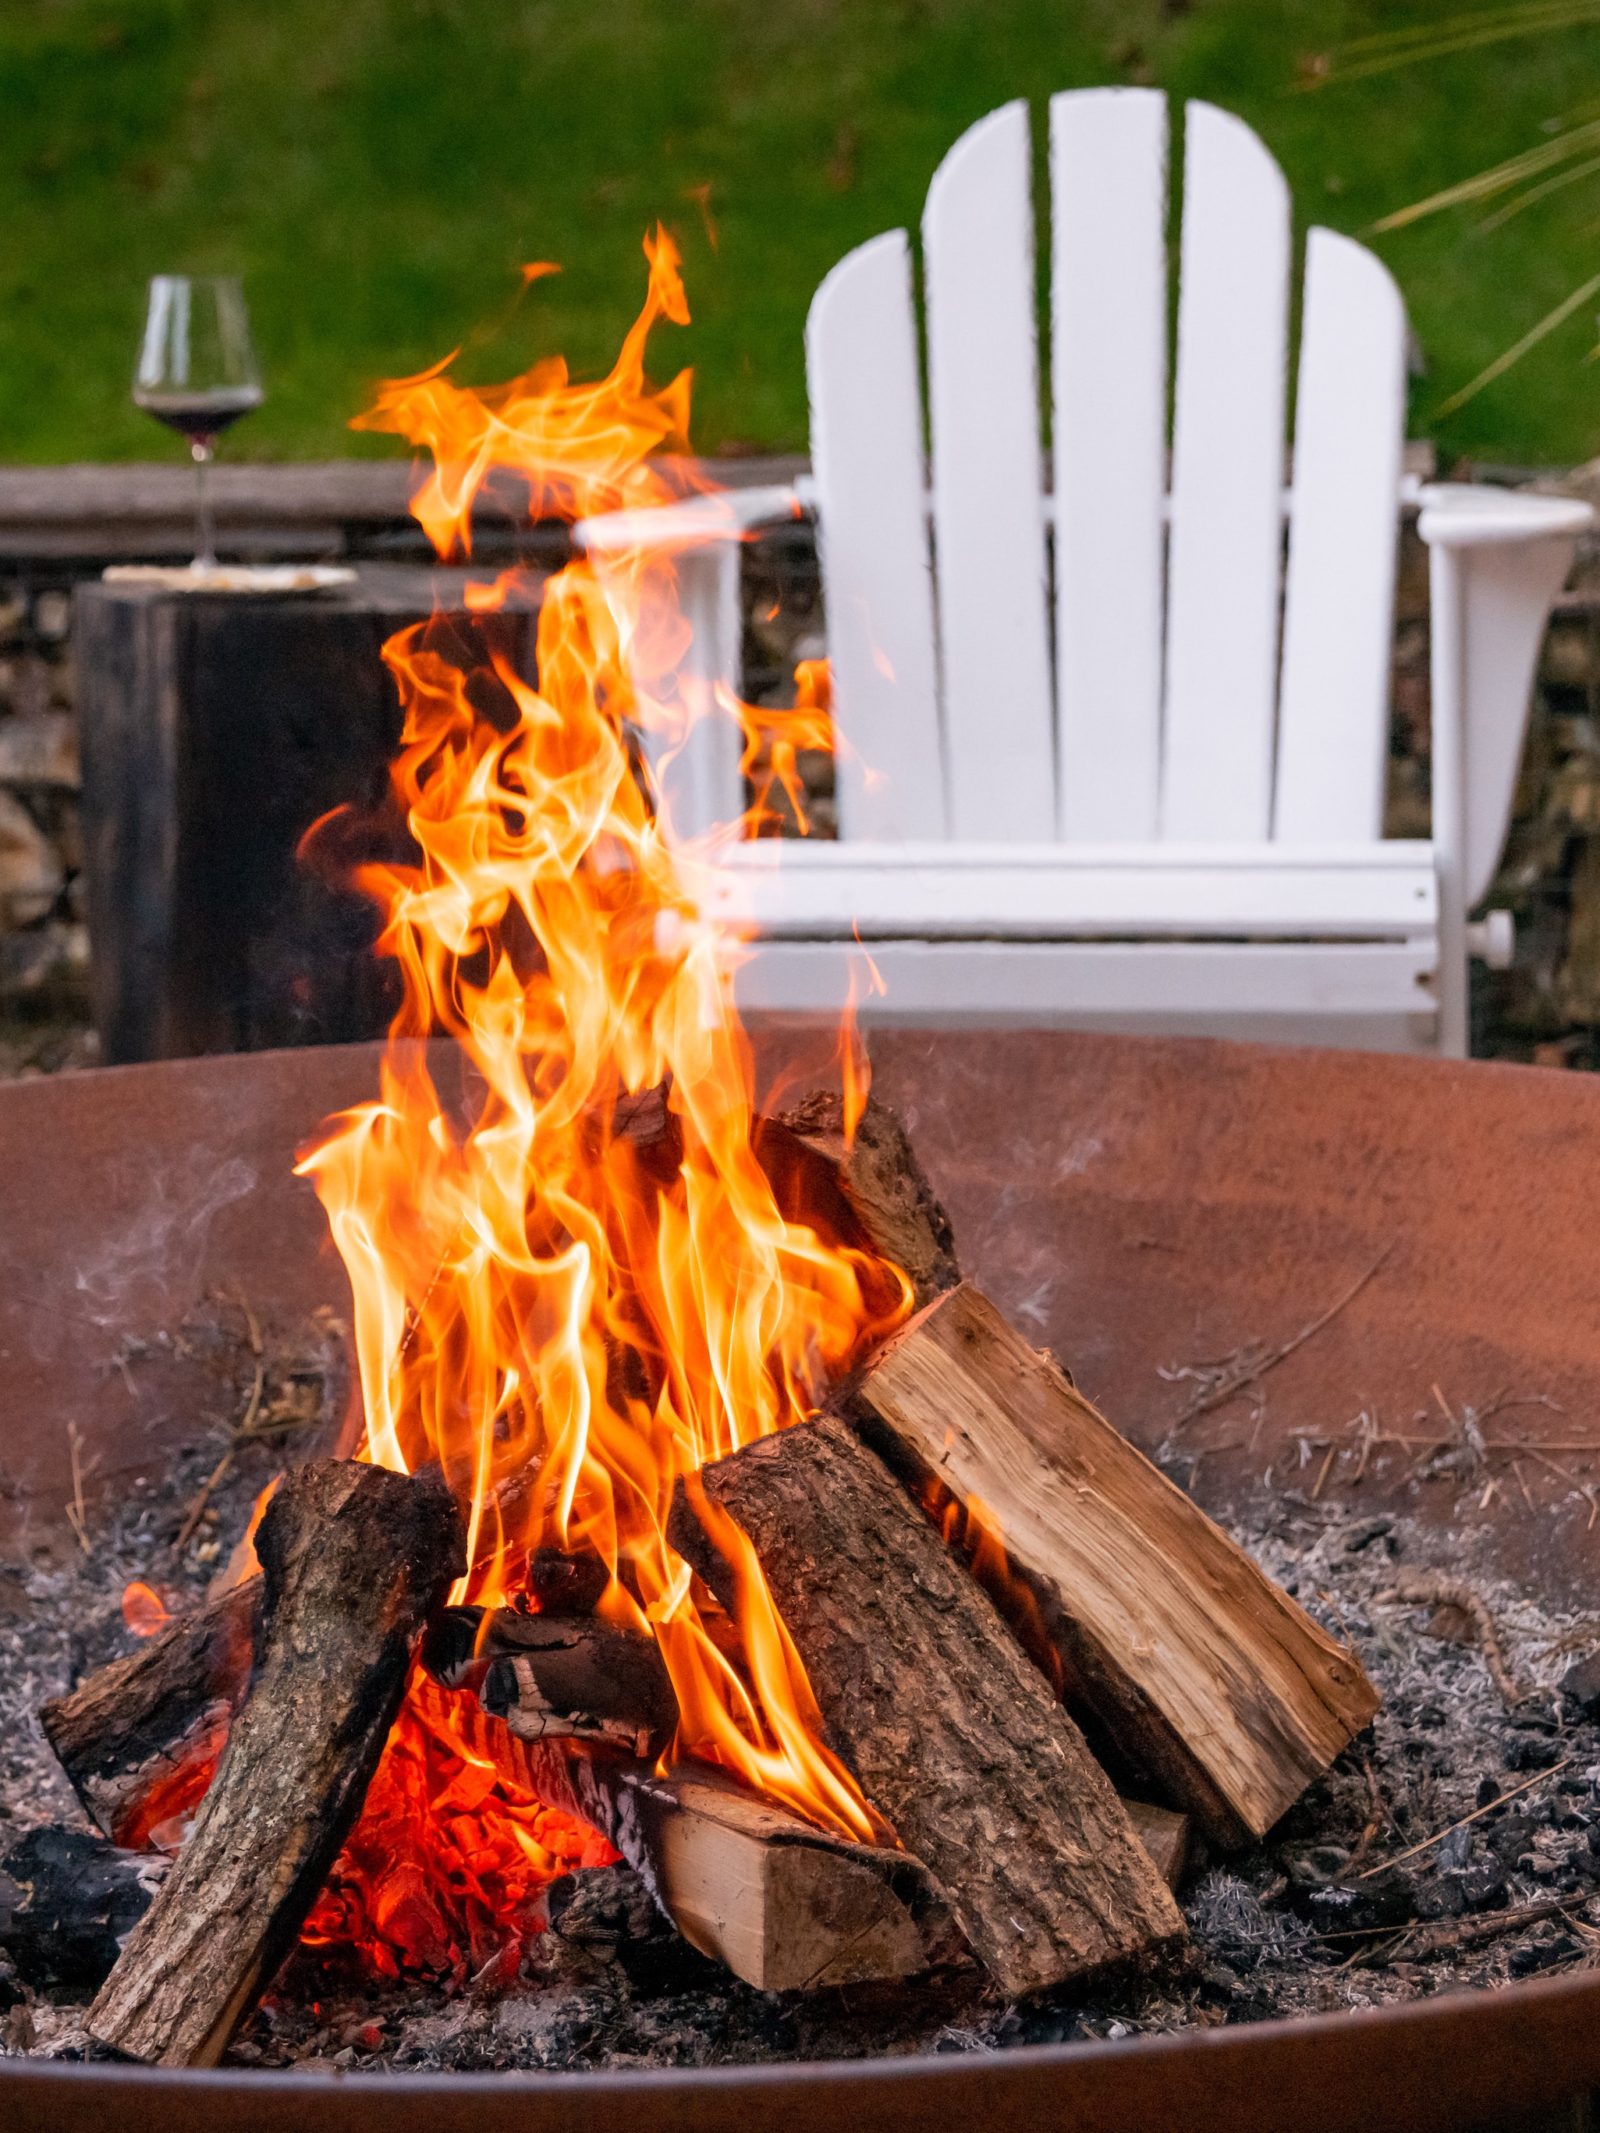 Fire Pit On Your Wood Or Composite Deck, Are Backyard Fire Pits Legal In California